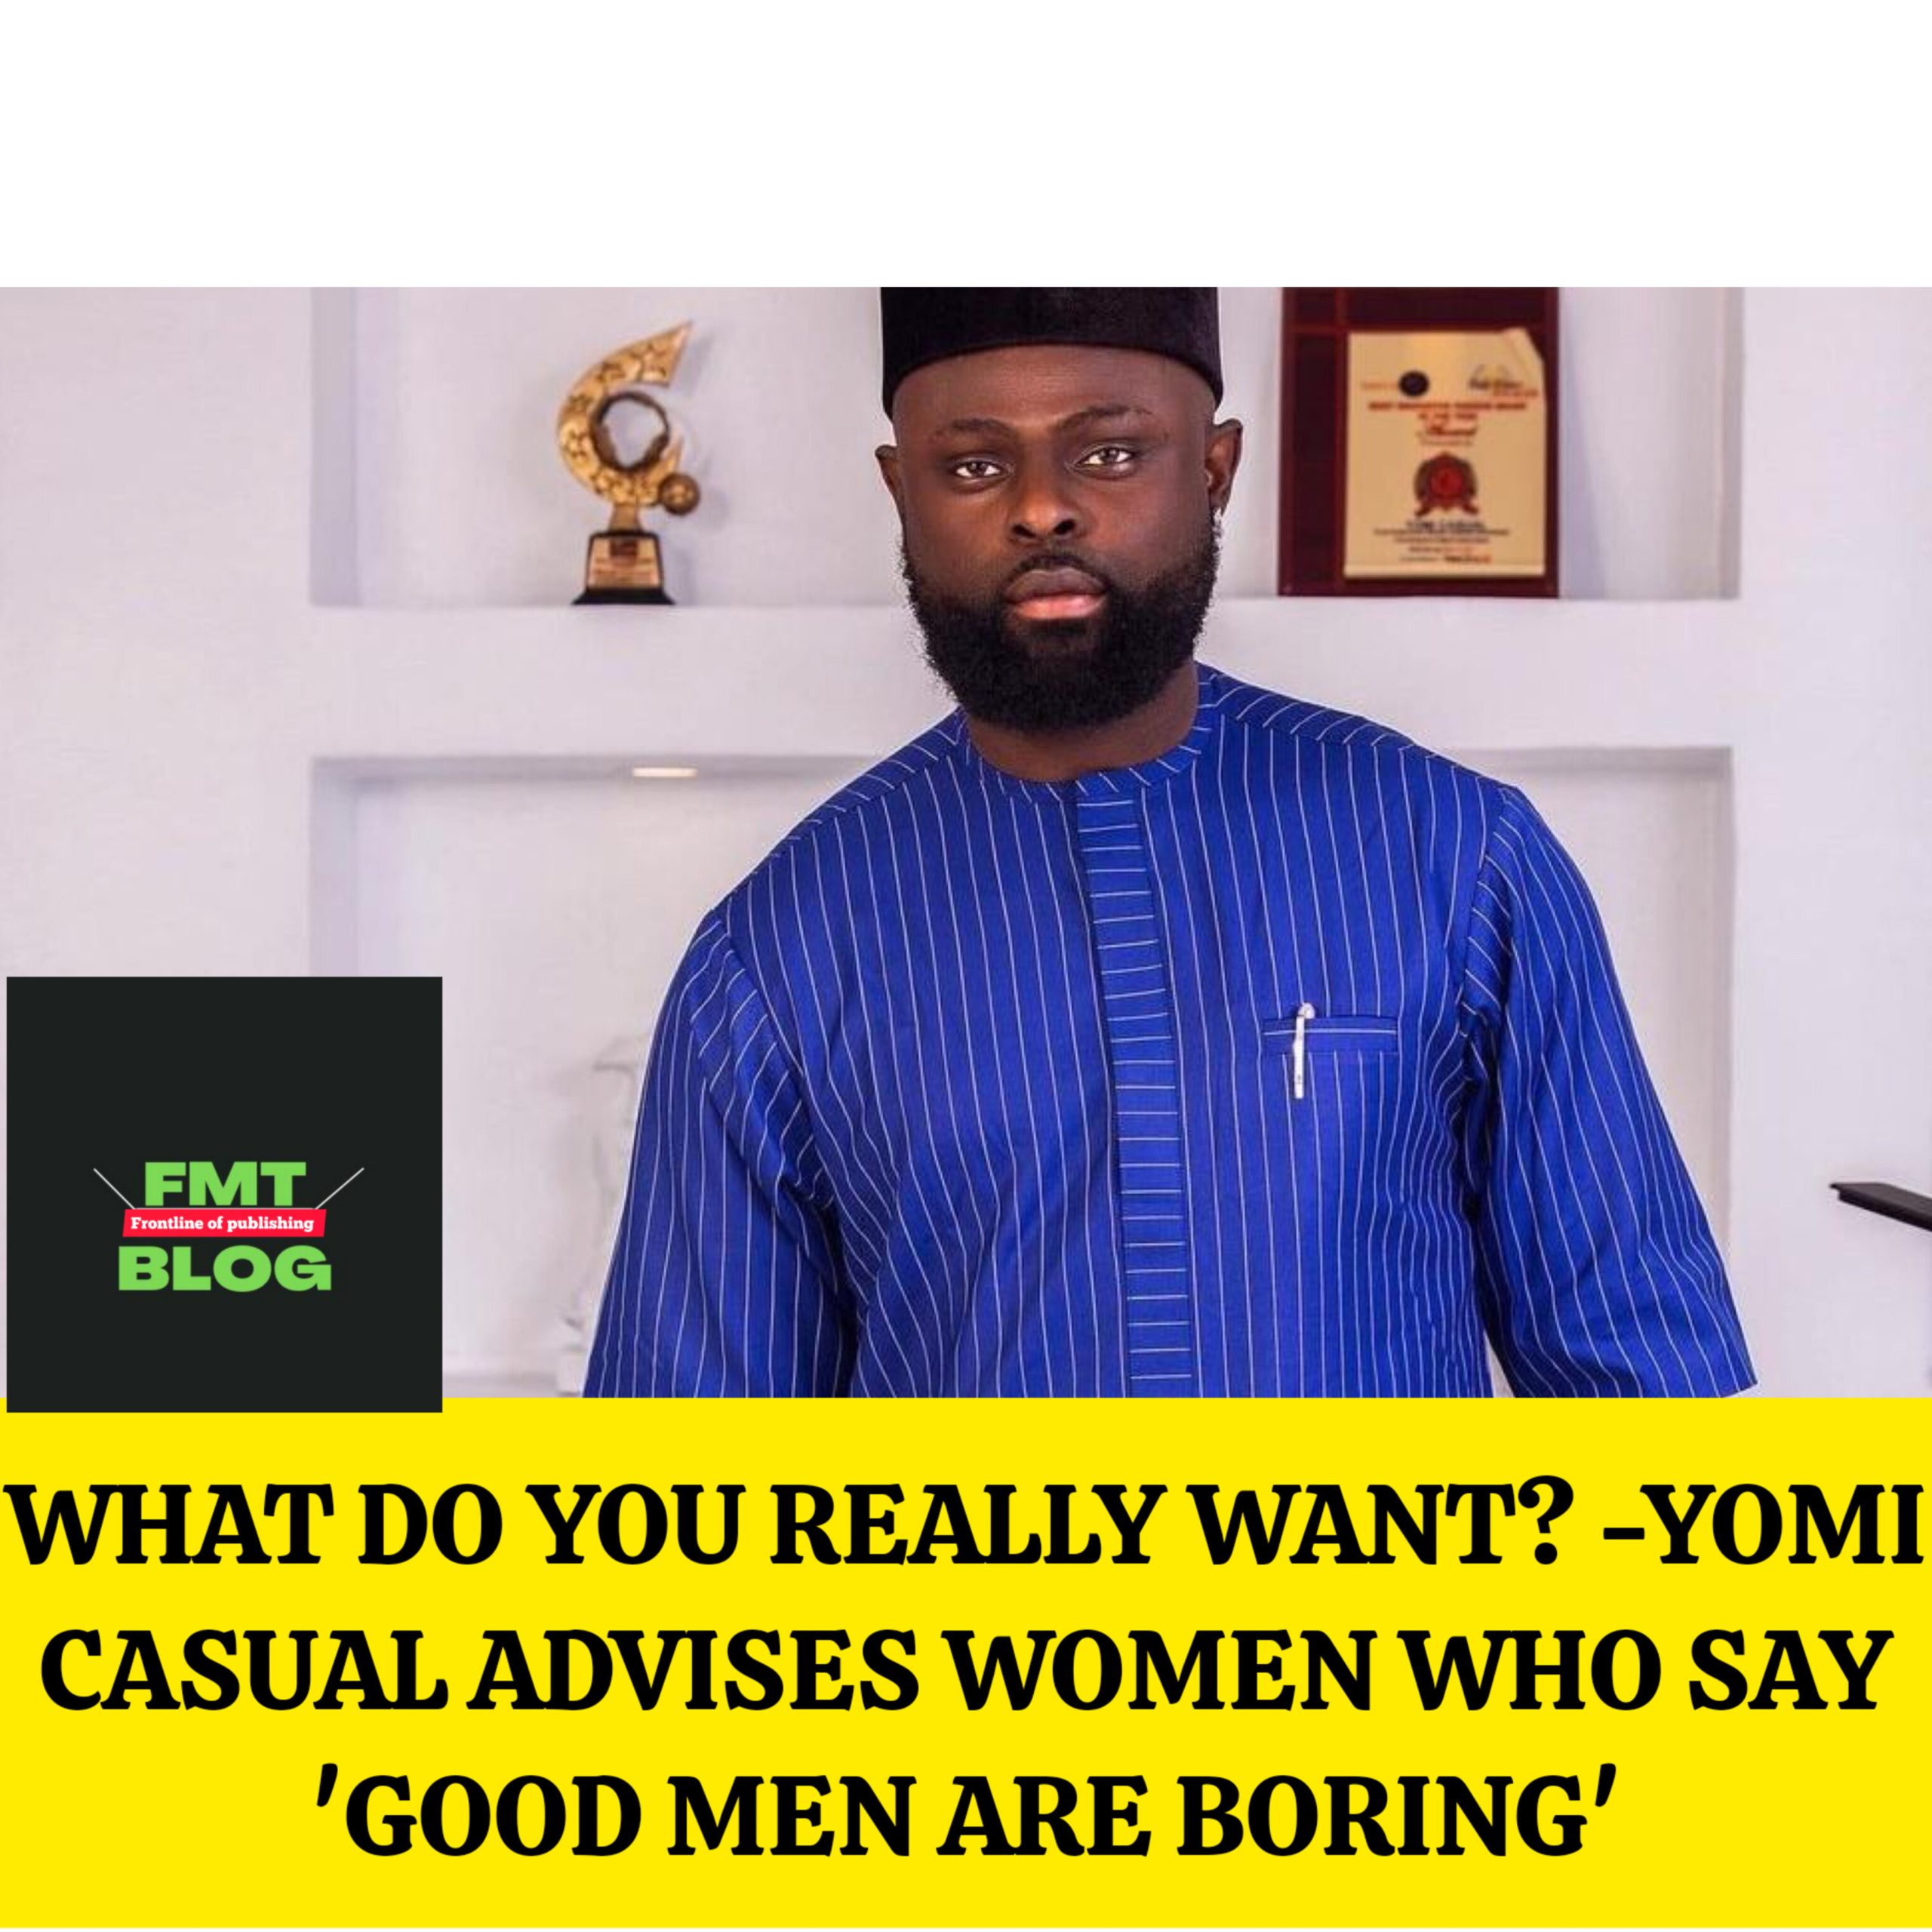 What do you really want? – Yomi Casual advises women who say ‘good men are boring’